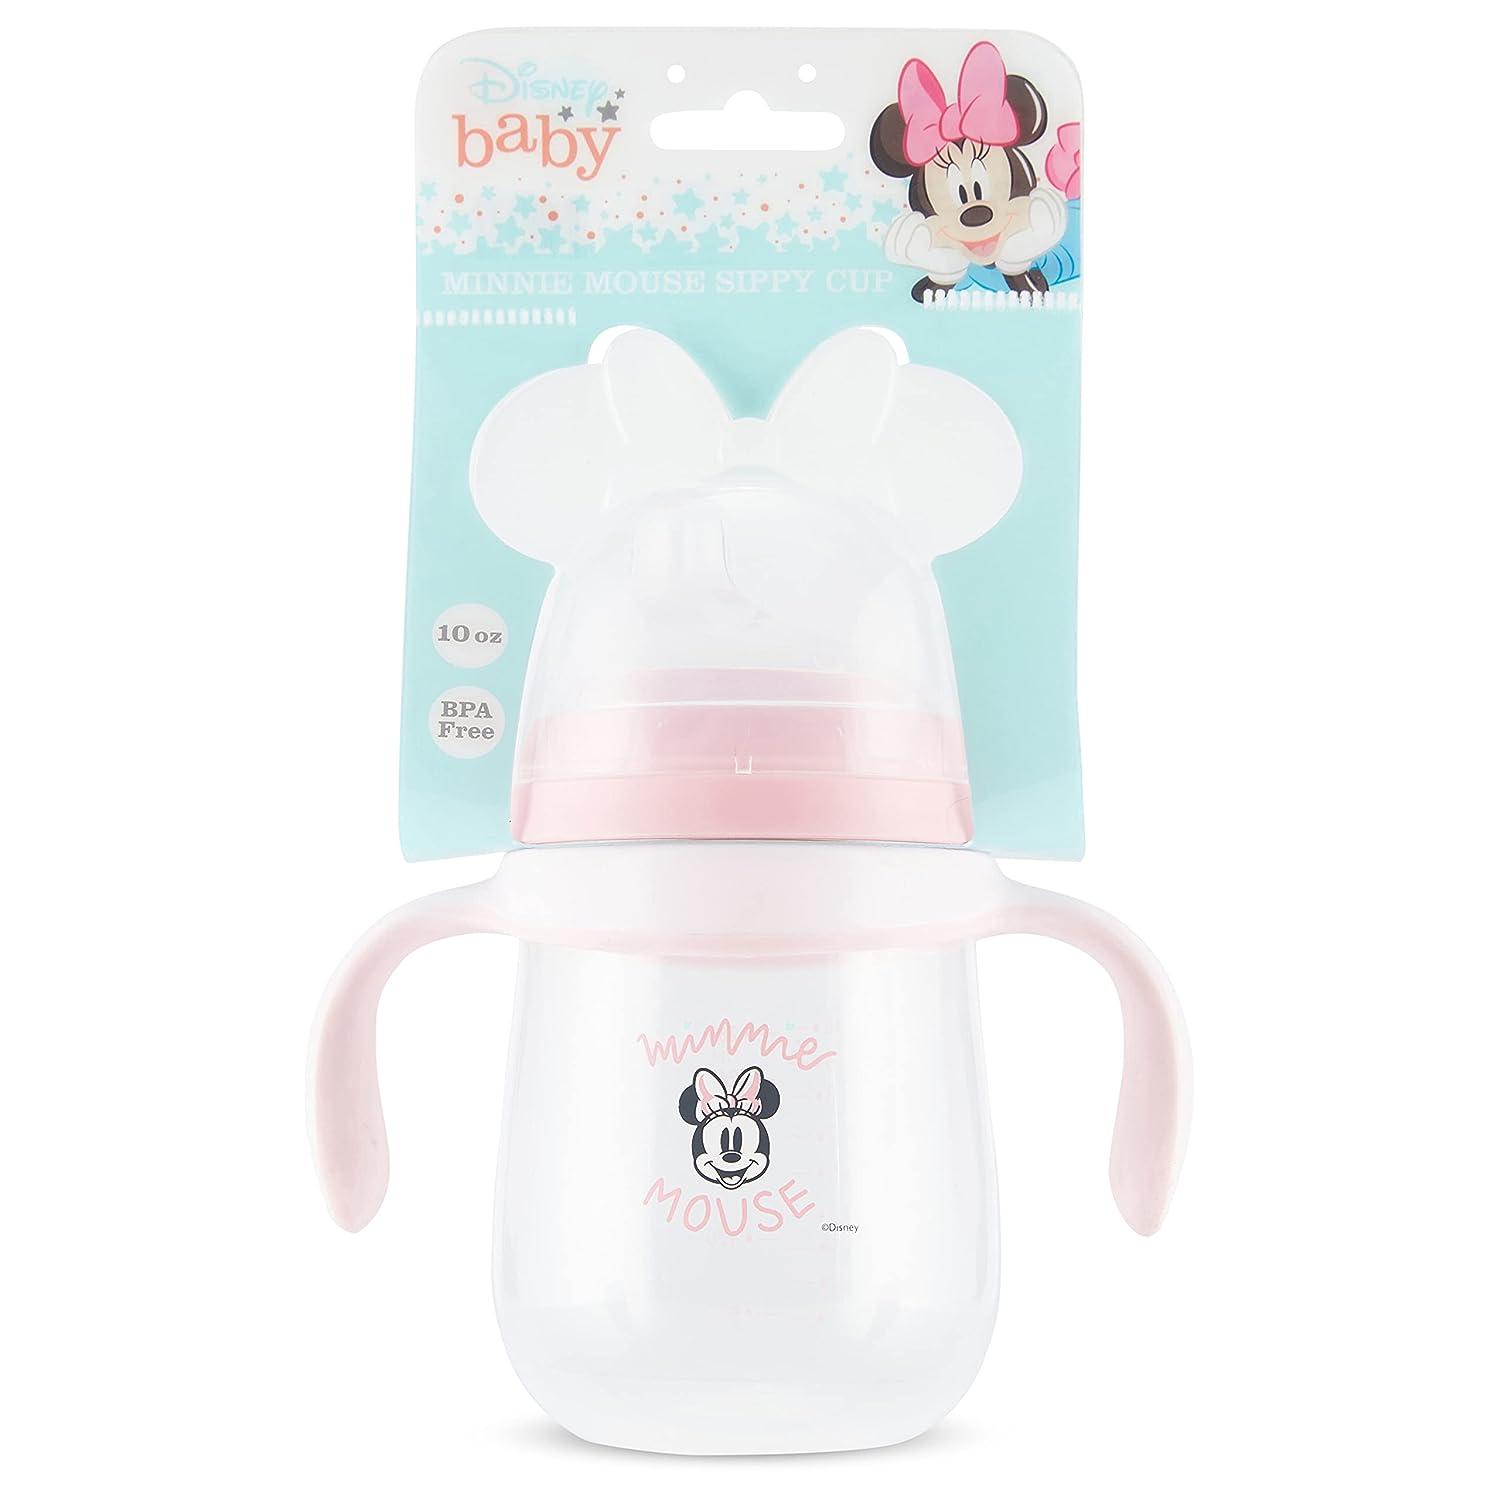 Disney Baby Kids Sippy Cups